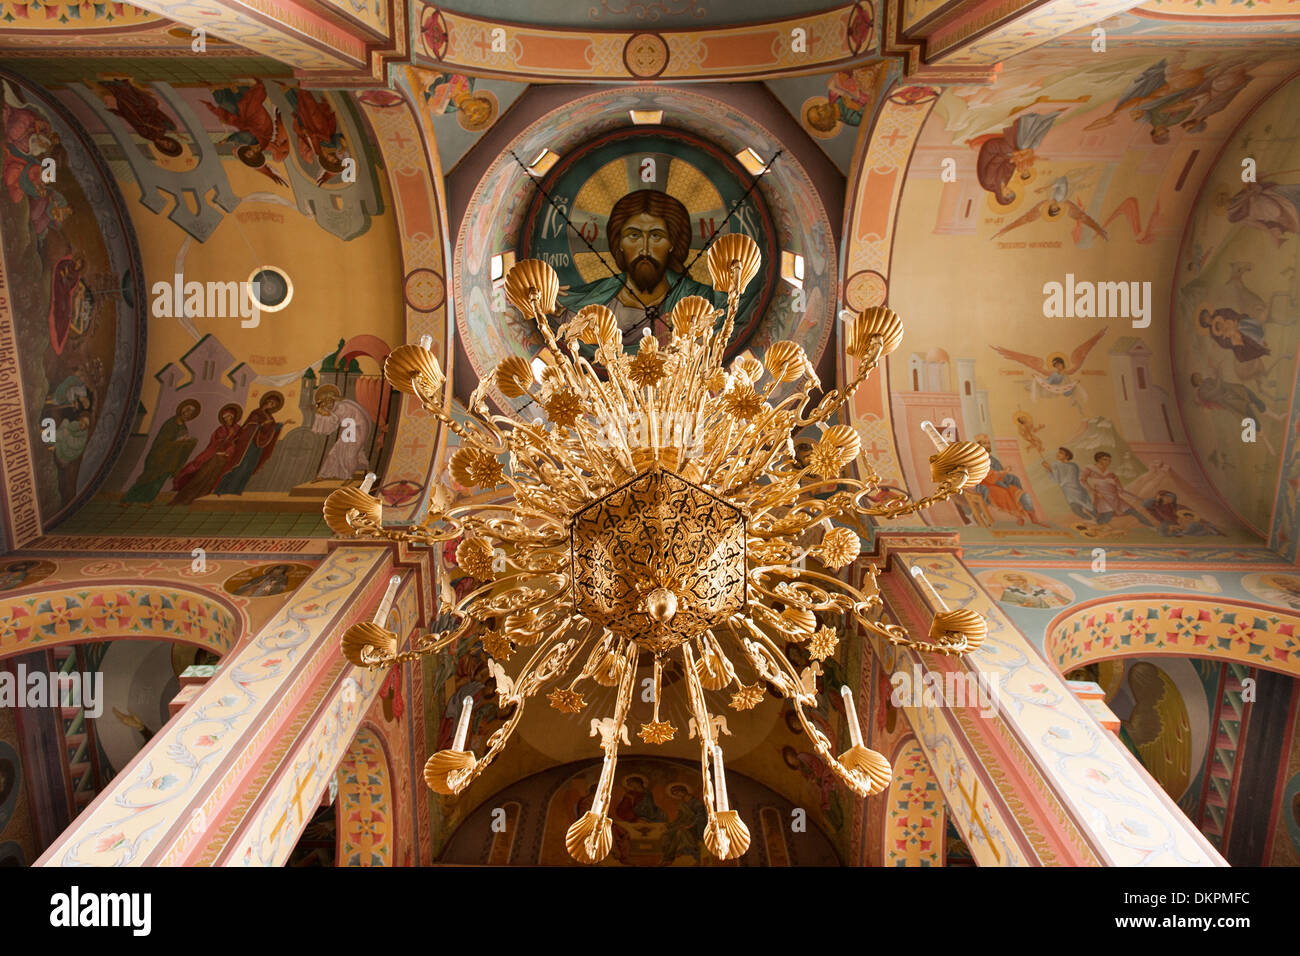 Interior, chandelier and ceiling of the Russian Orthodox Church of Nativity in Tiraspol, the capital of Transnistria. Stock Photo